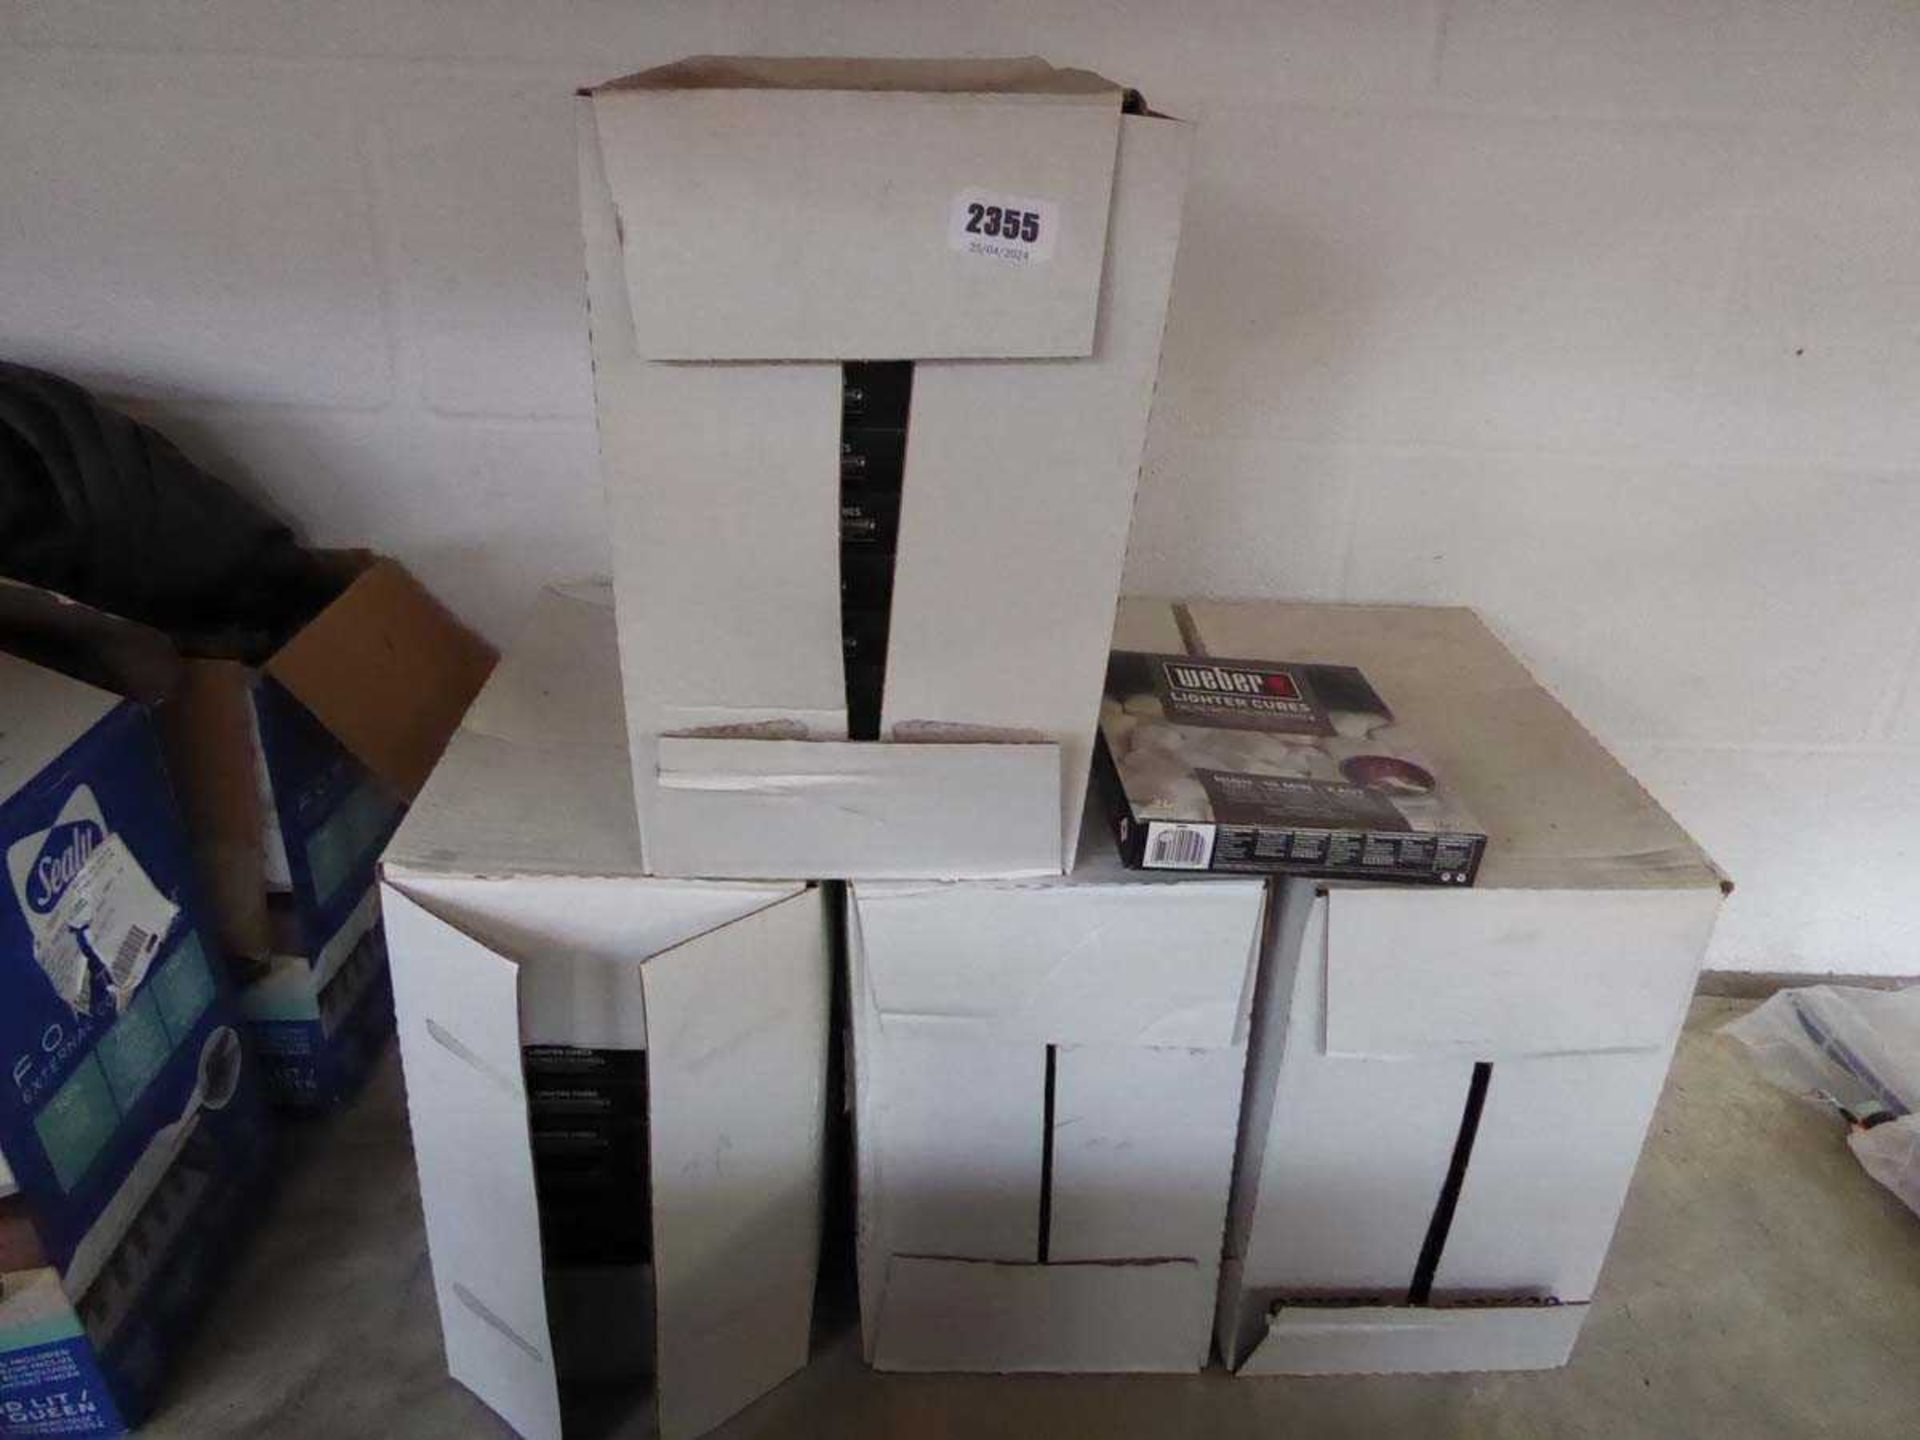 4 boxes containing 24 packs of Weber fire lighter cube sets